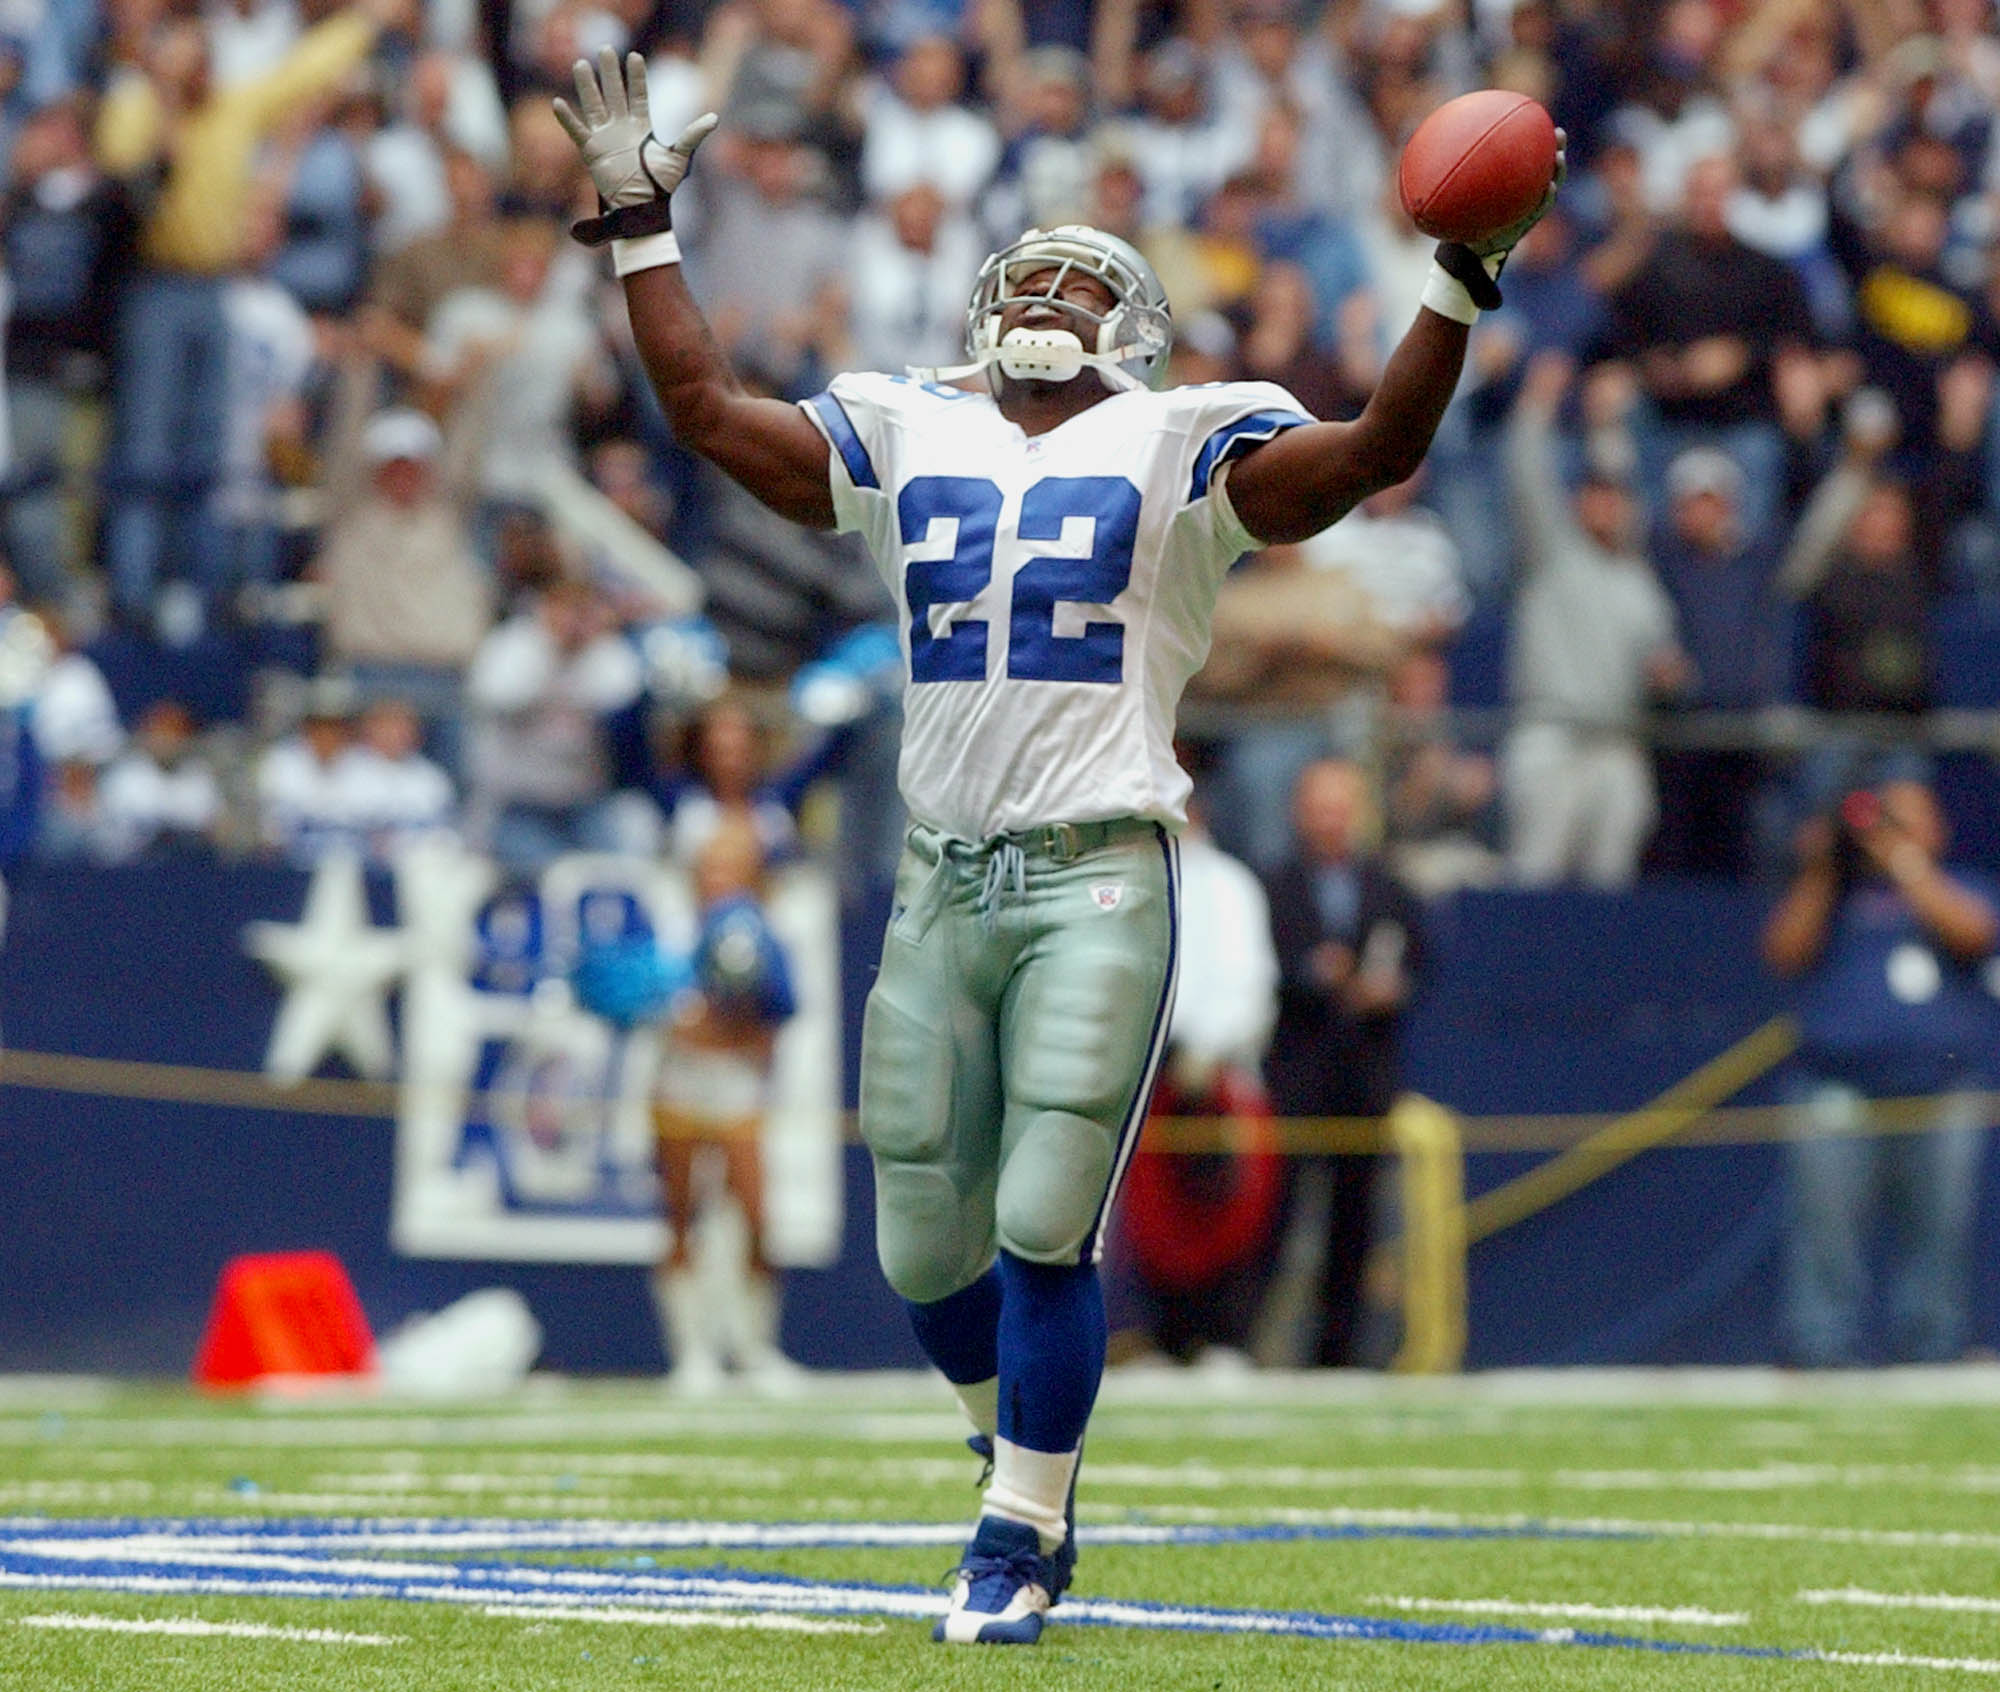 Flashback: Relive Emmitt Smith's record-breaking run to become the NFL's  career rushing leader